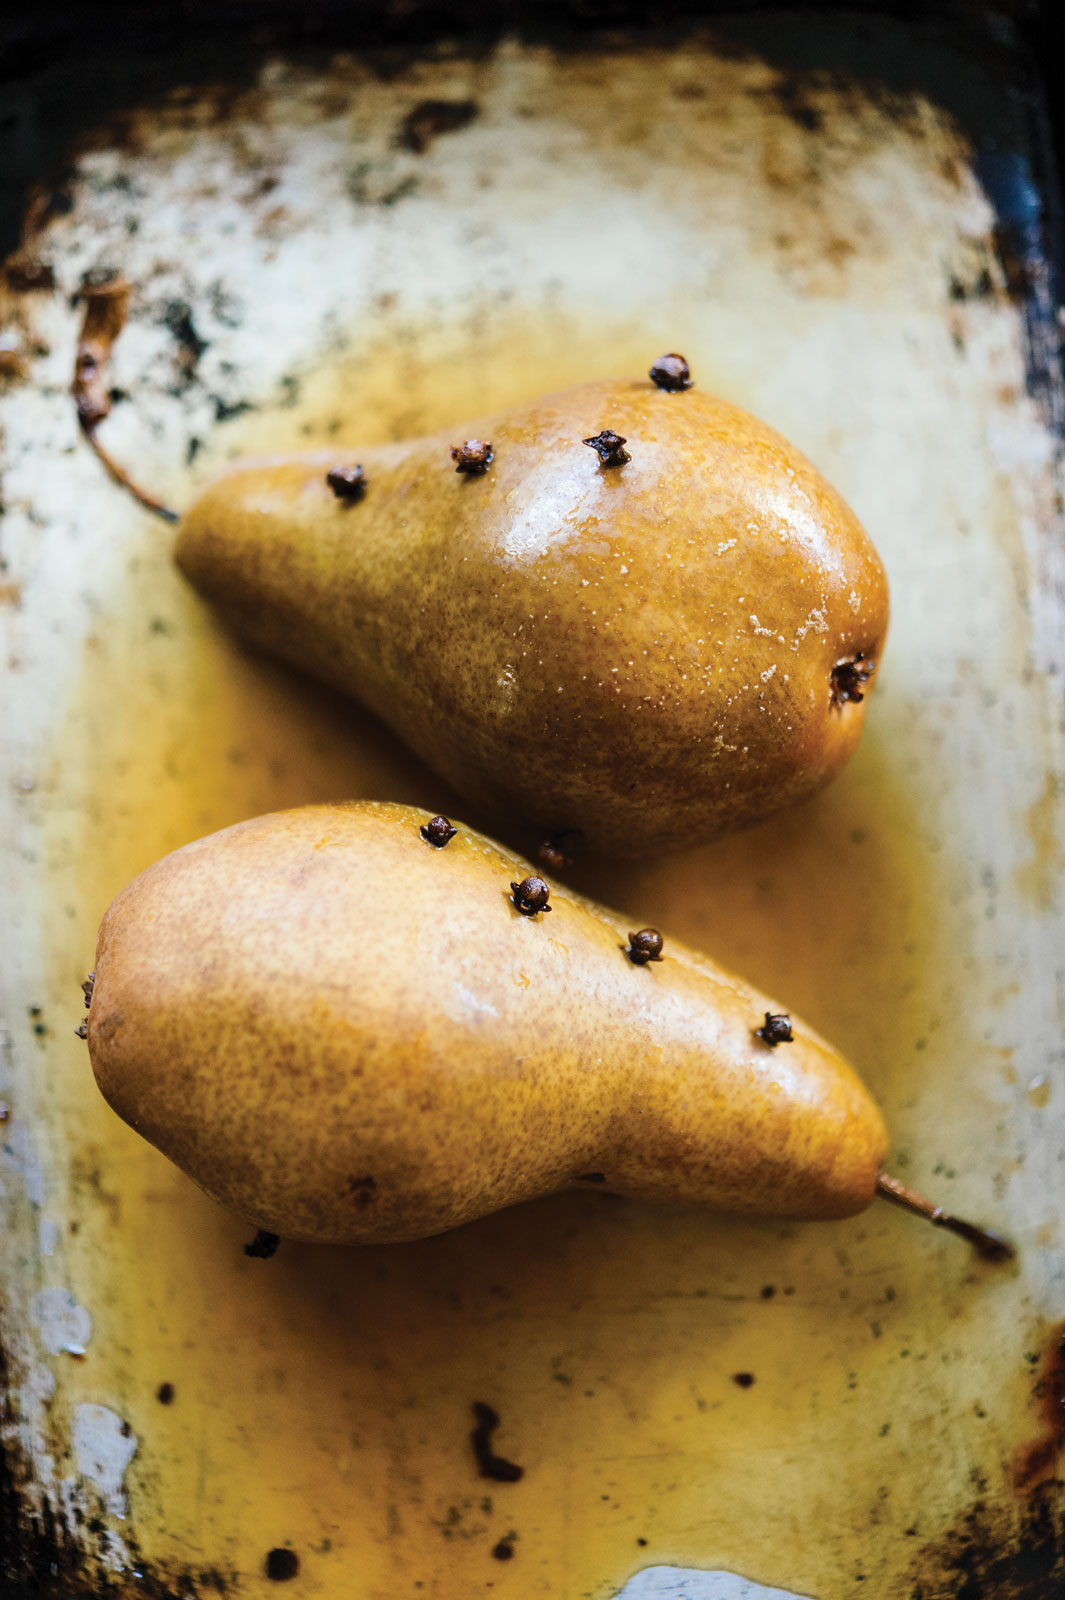 Pears studded with cloves to make Wassail punch